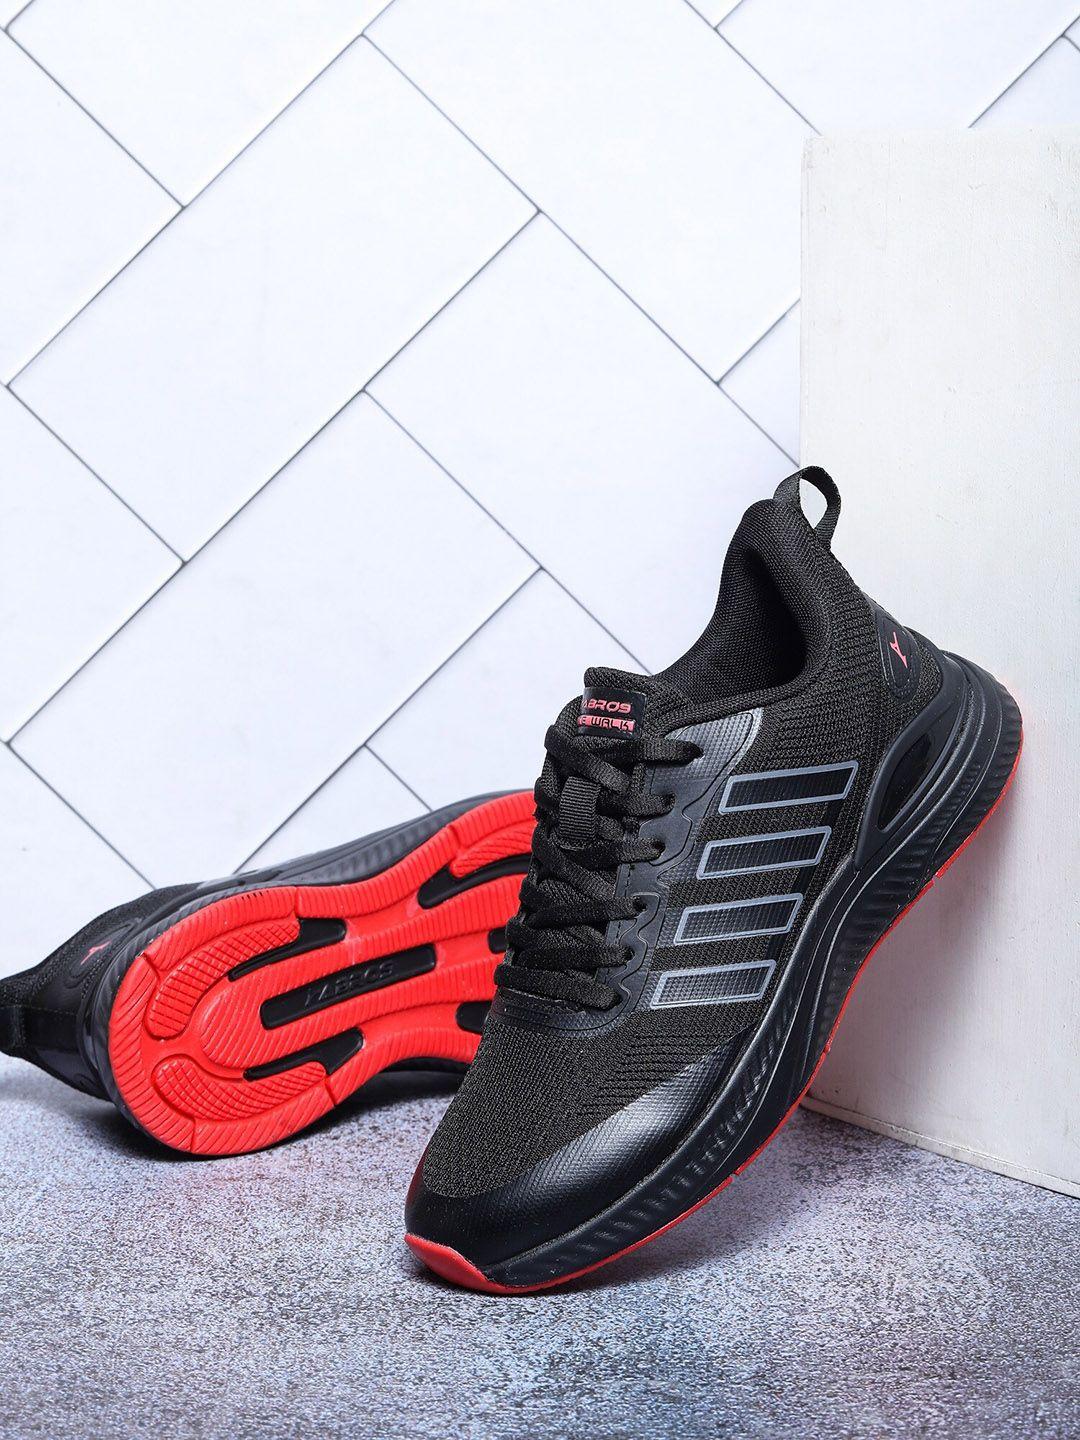 abros men jagger running sports shoes